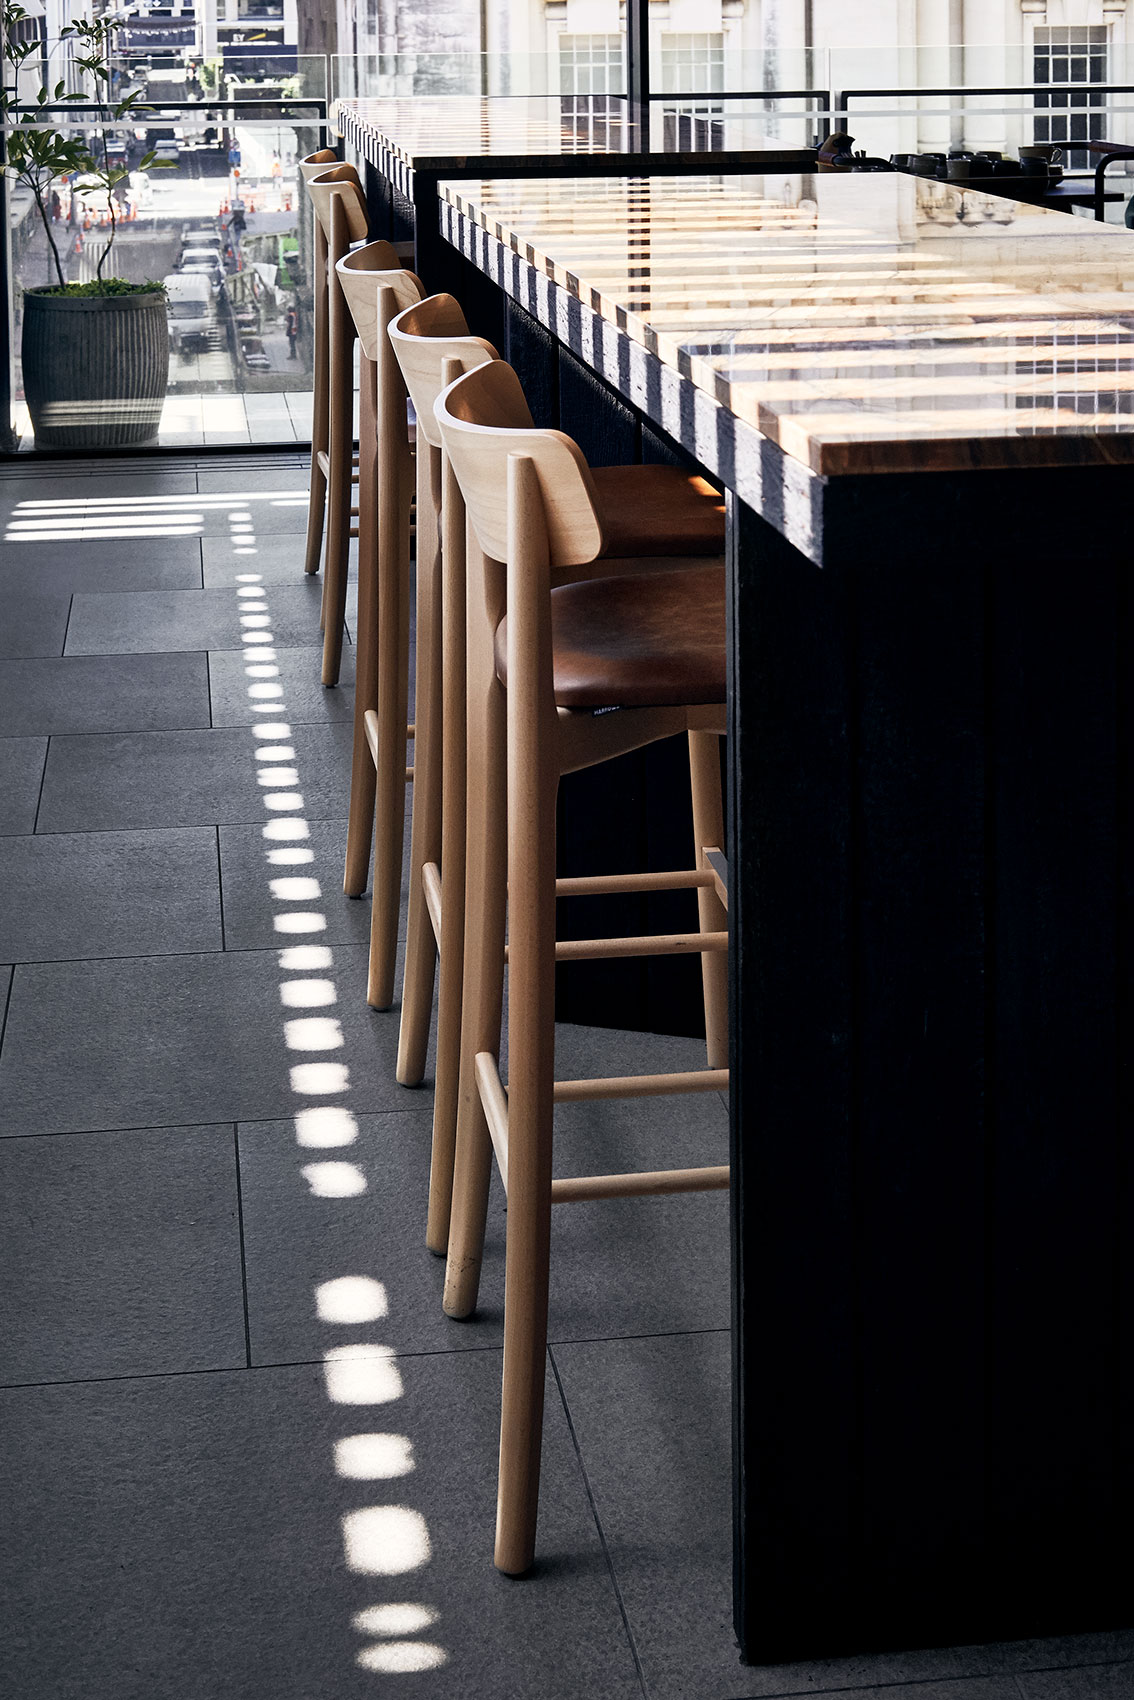 Ahi Bar Counter & Stools in Filtered Light • Hospitality & Culinary Food Photography